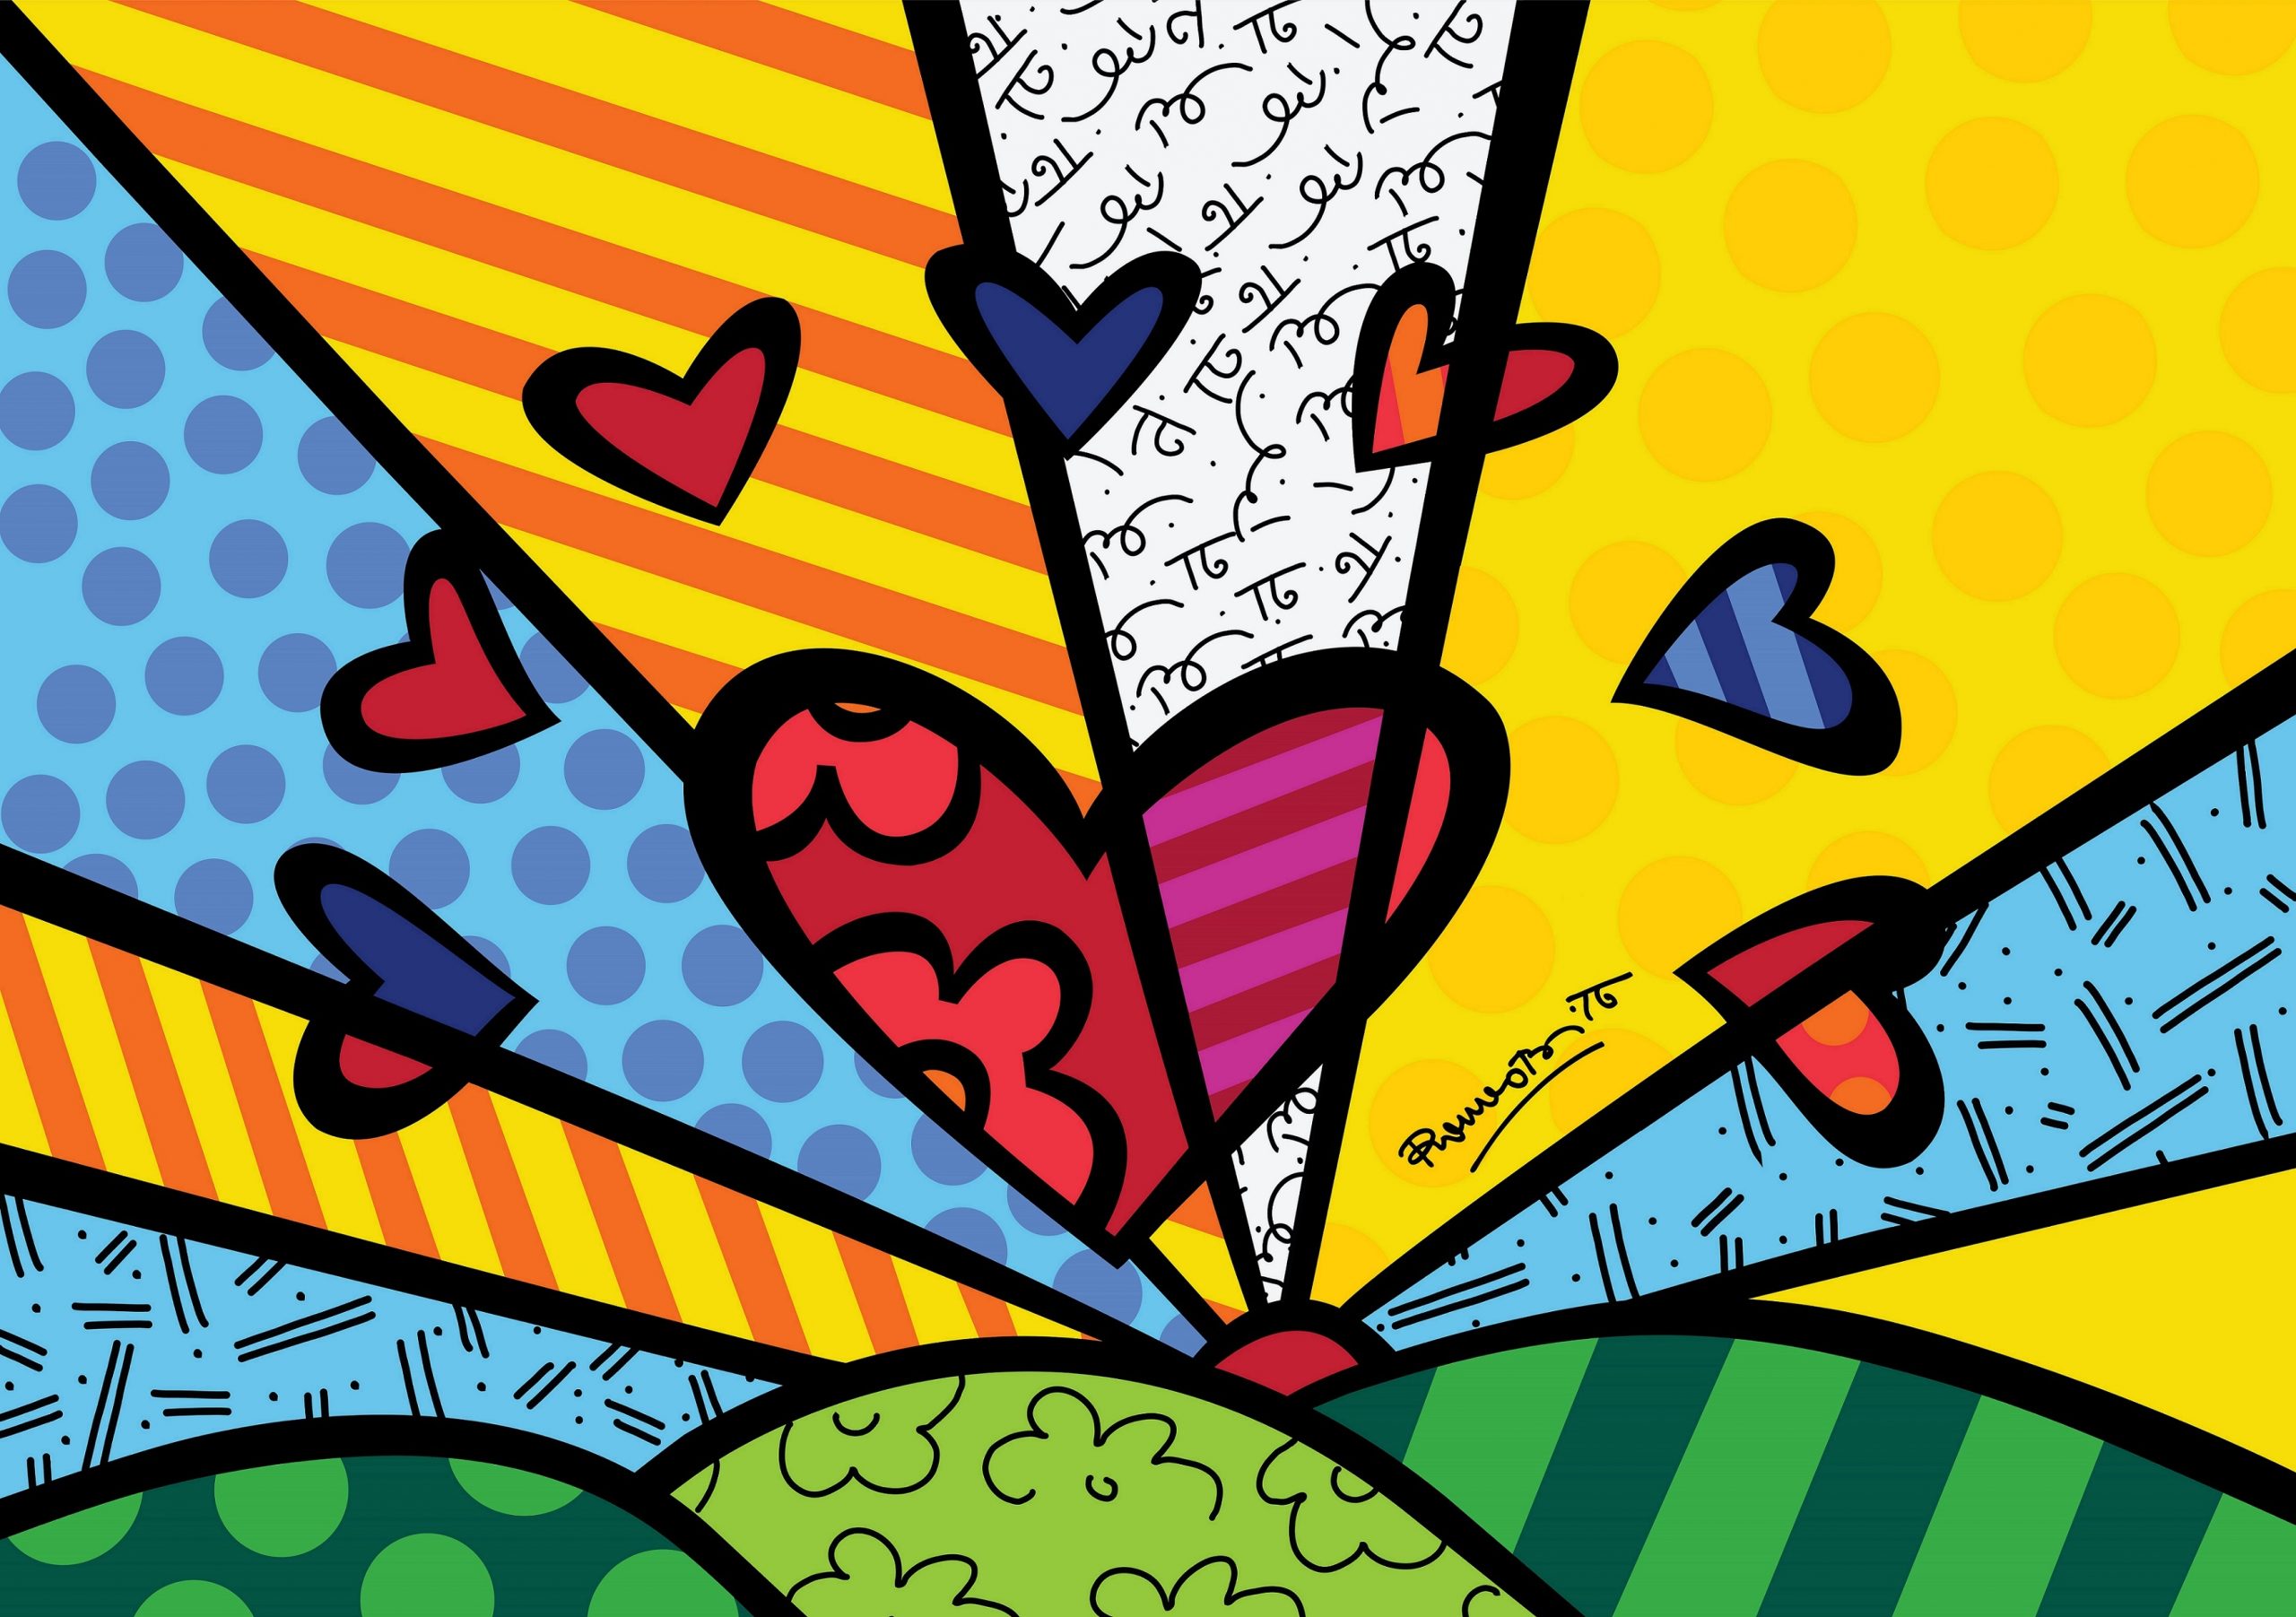 visionary international artist Romero Britto Appoints WildBrain CPLG |  Total Licensing